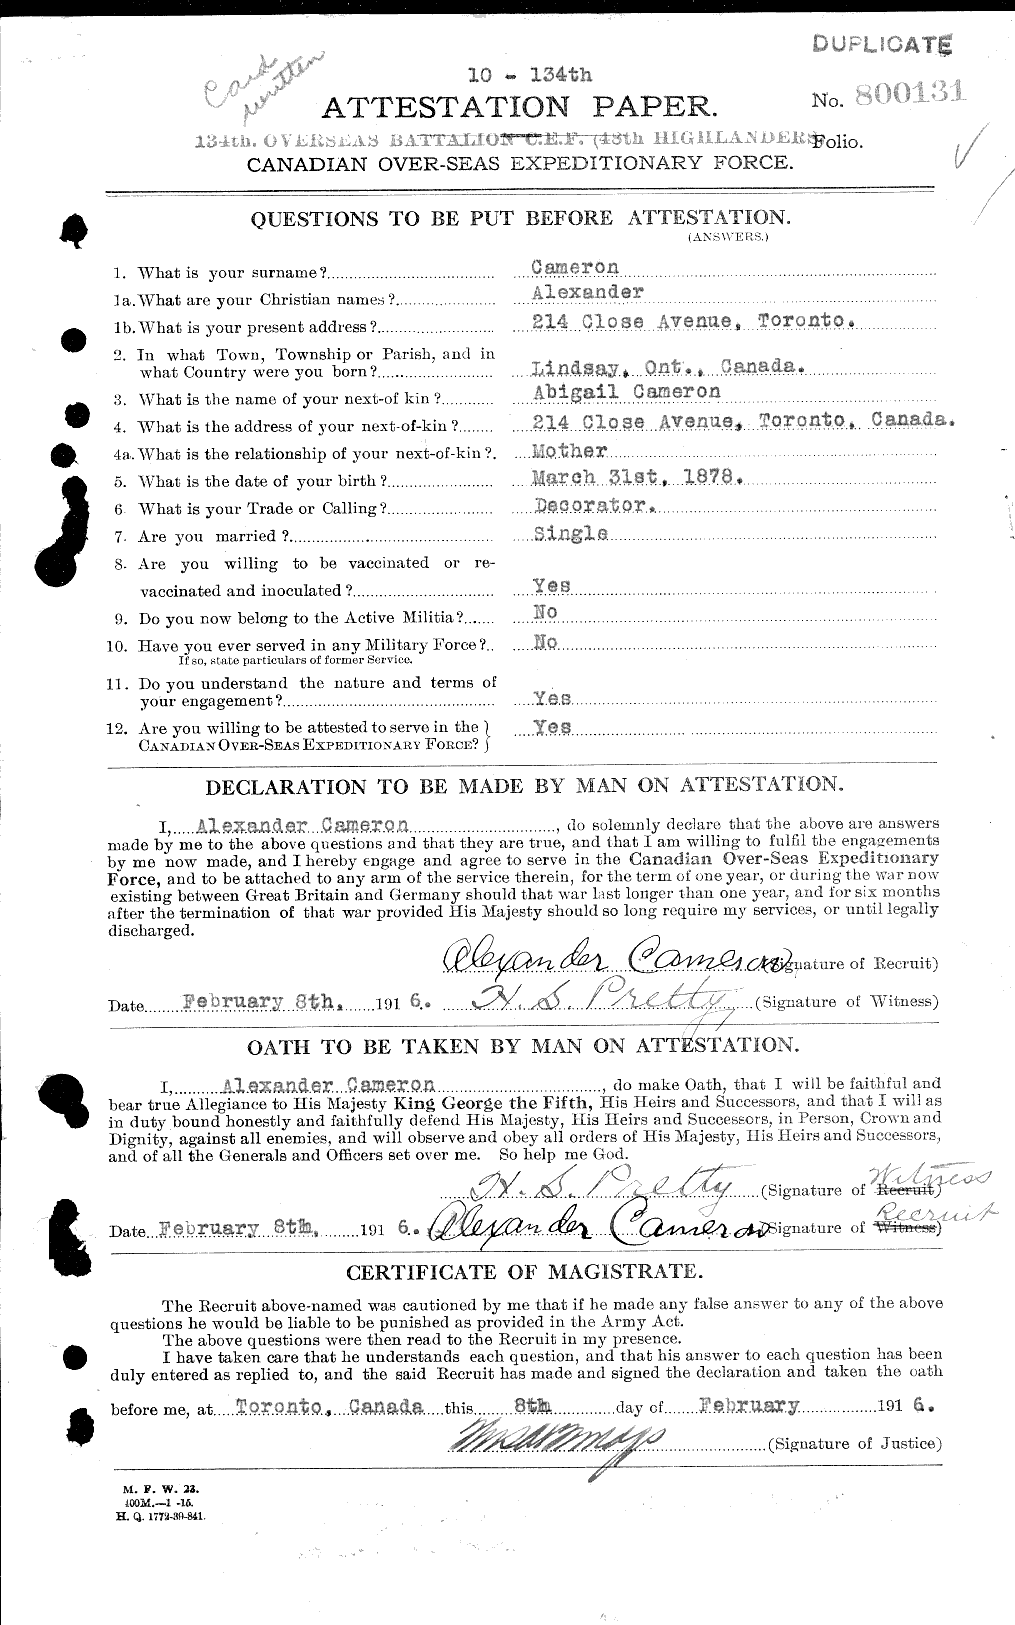 Personnel Records of the First World War - CEF 000792a